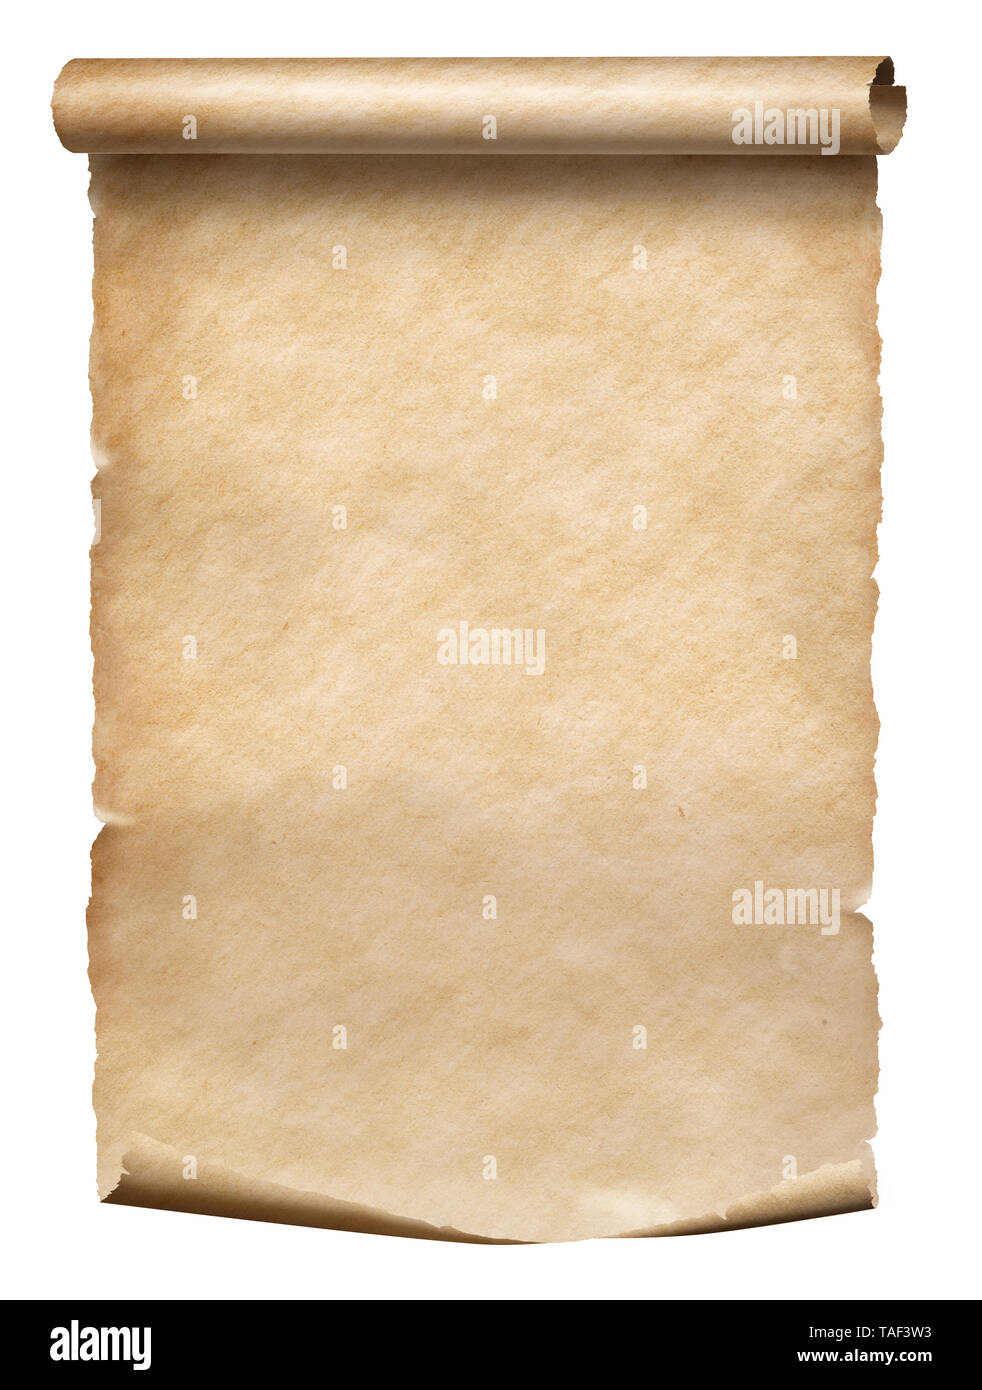 Old parchment scroll isolated on white Stock Photo